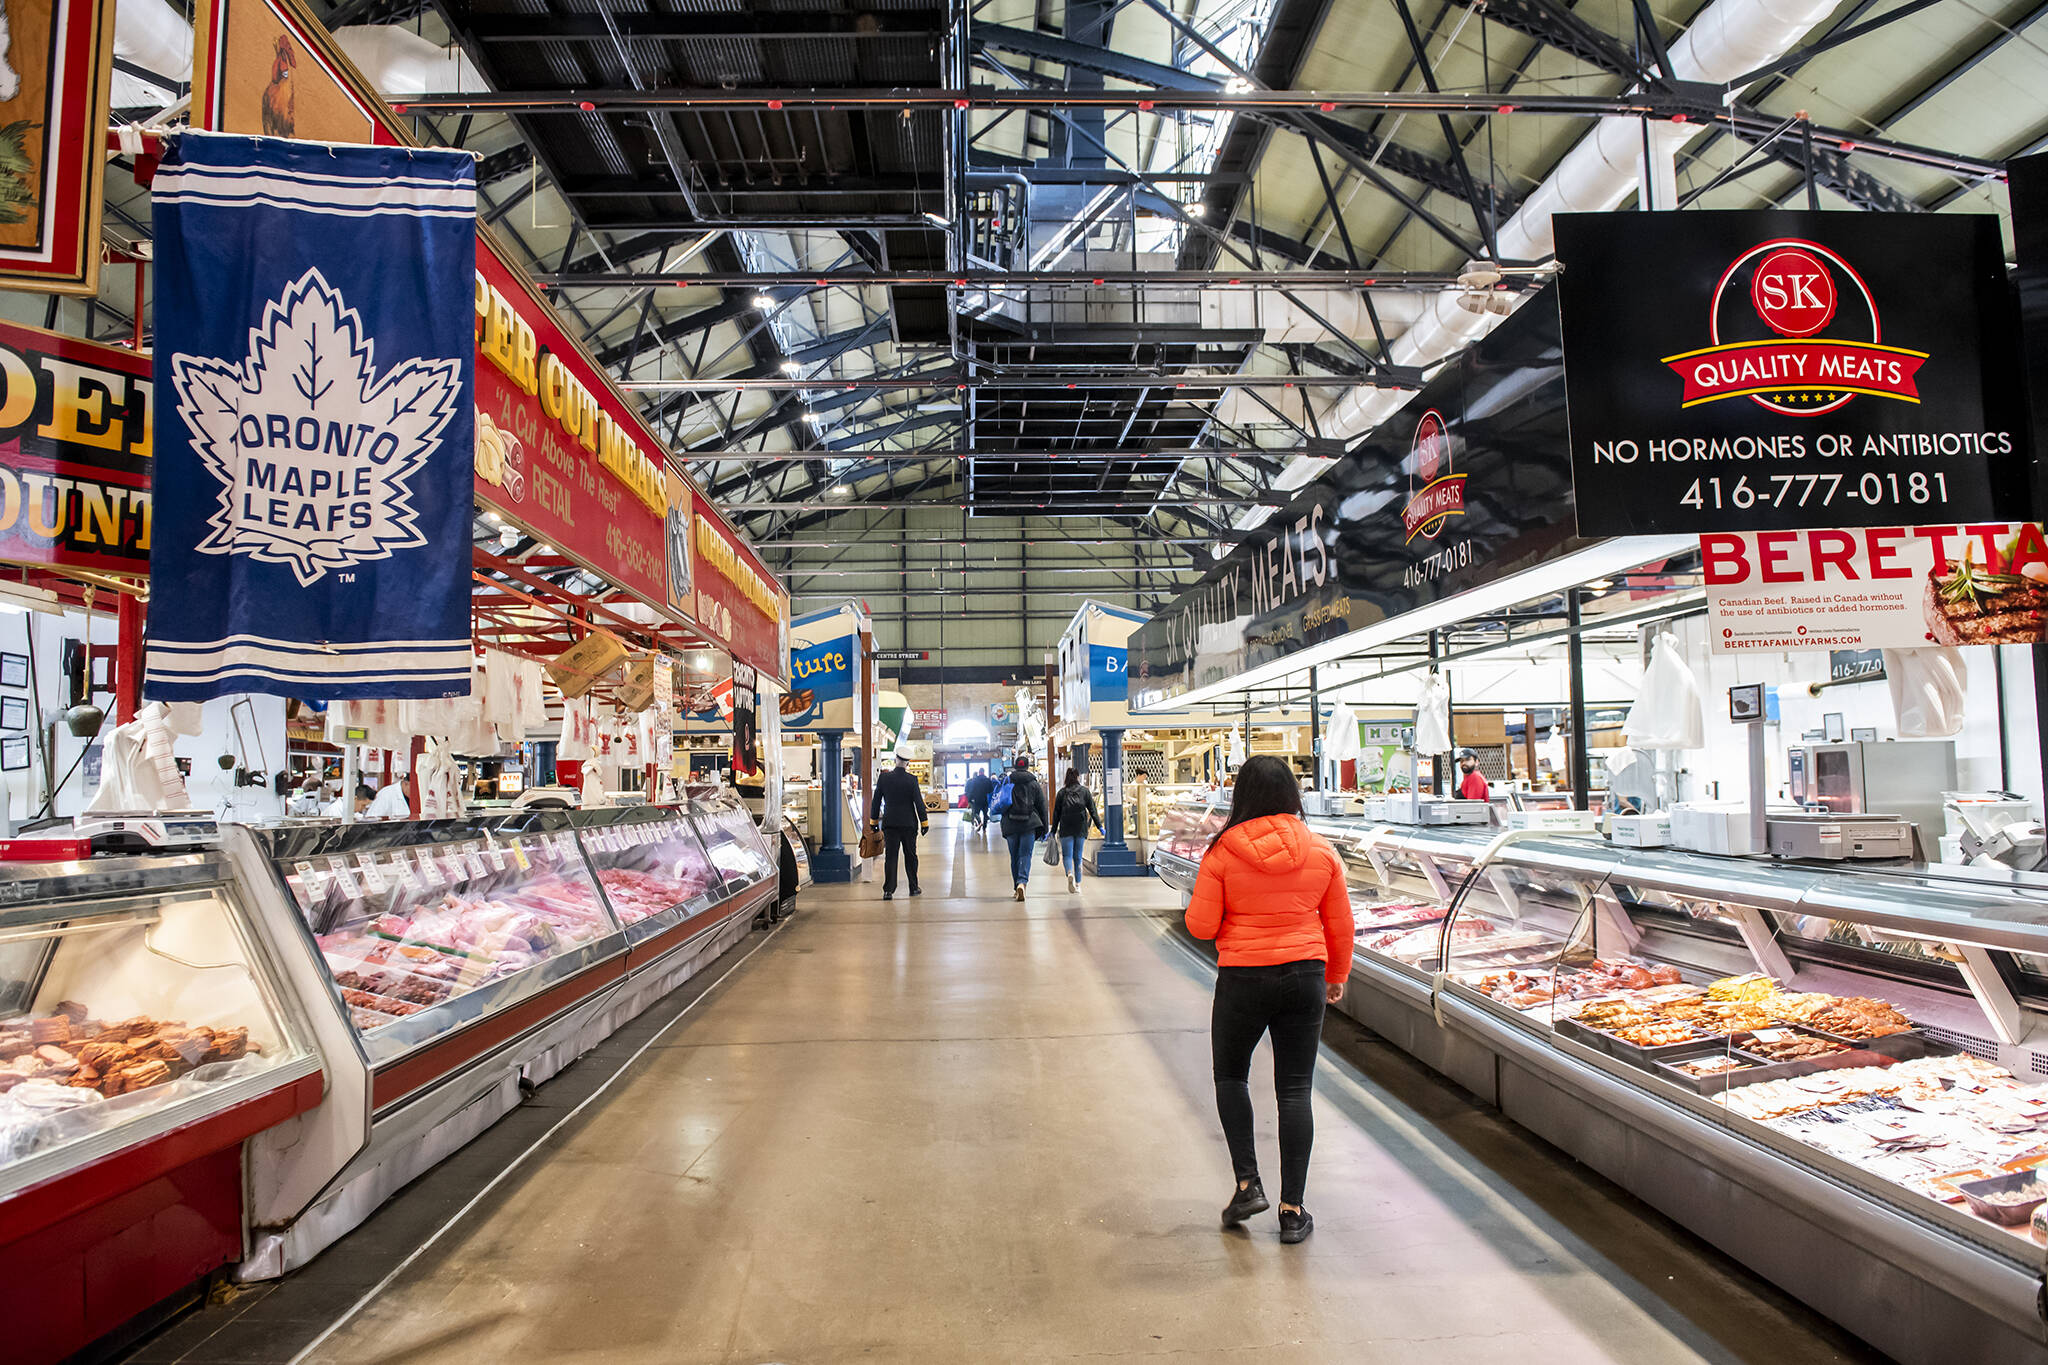 St. Lawrence Market in Toronto is officially expanding its hours